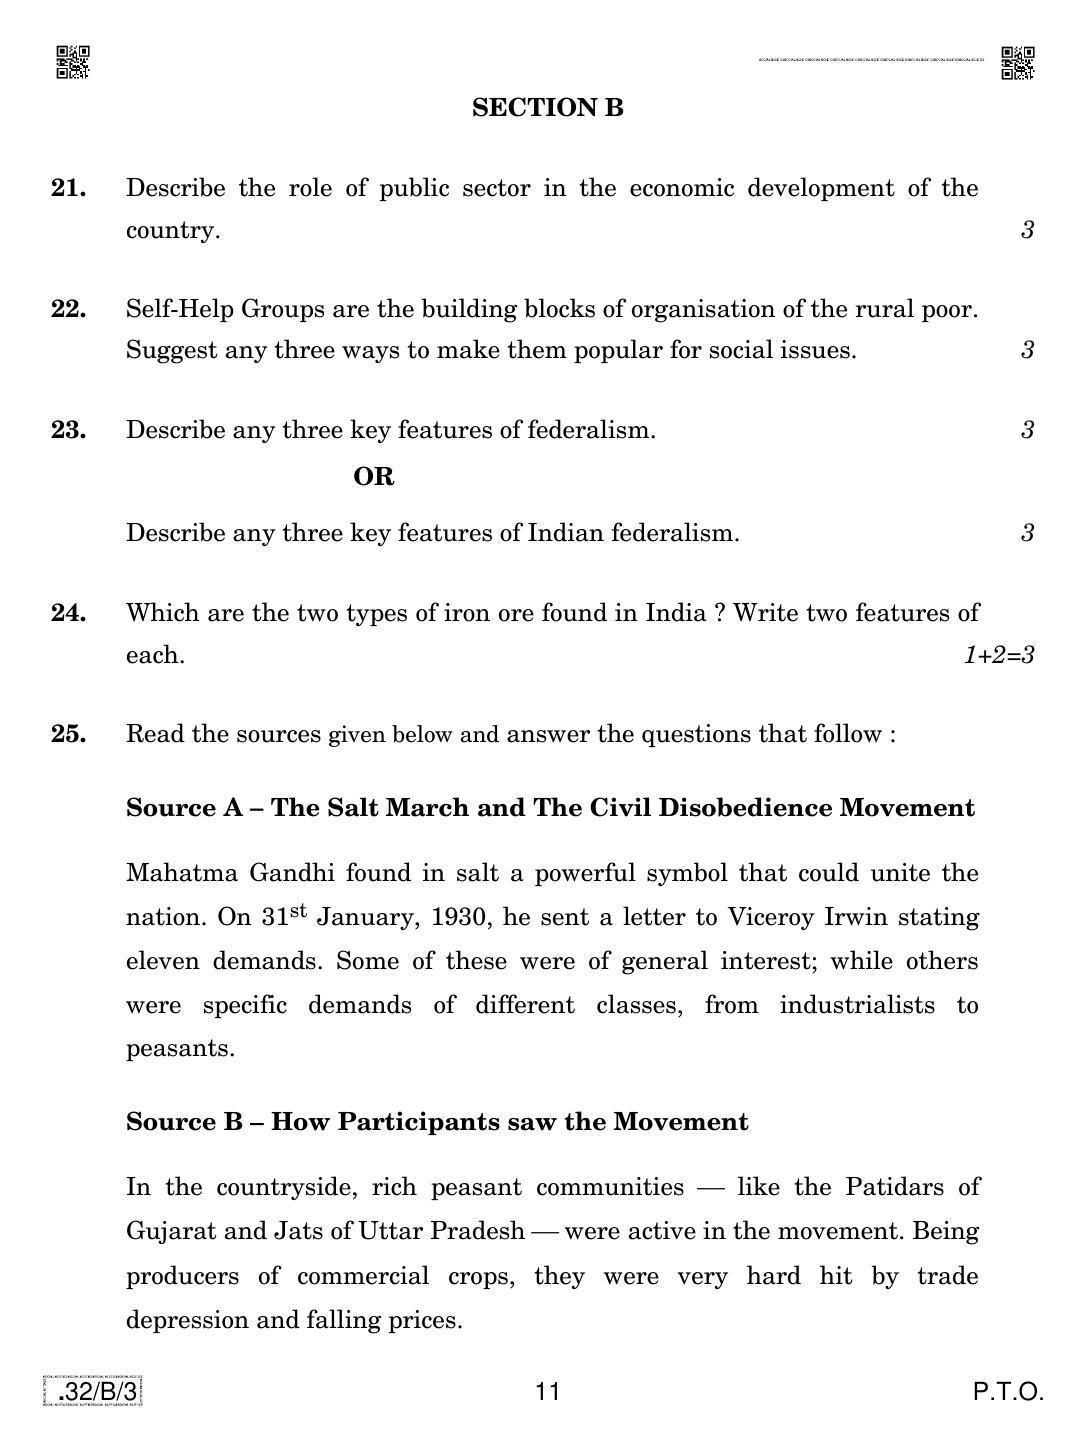 CBSE Class 10 32-C-3 Social Science 2020 Compartment Question Paper - Page 11